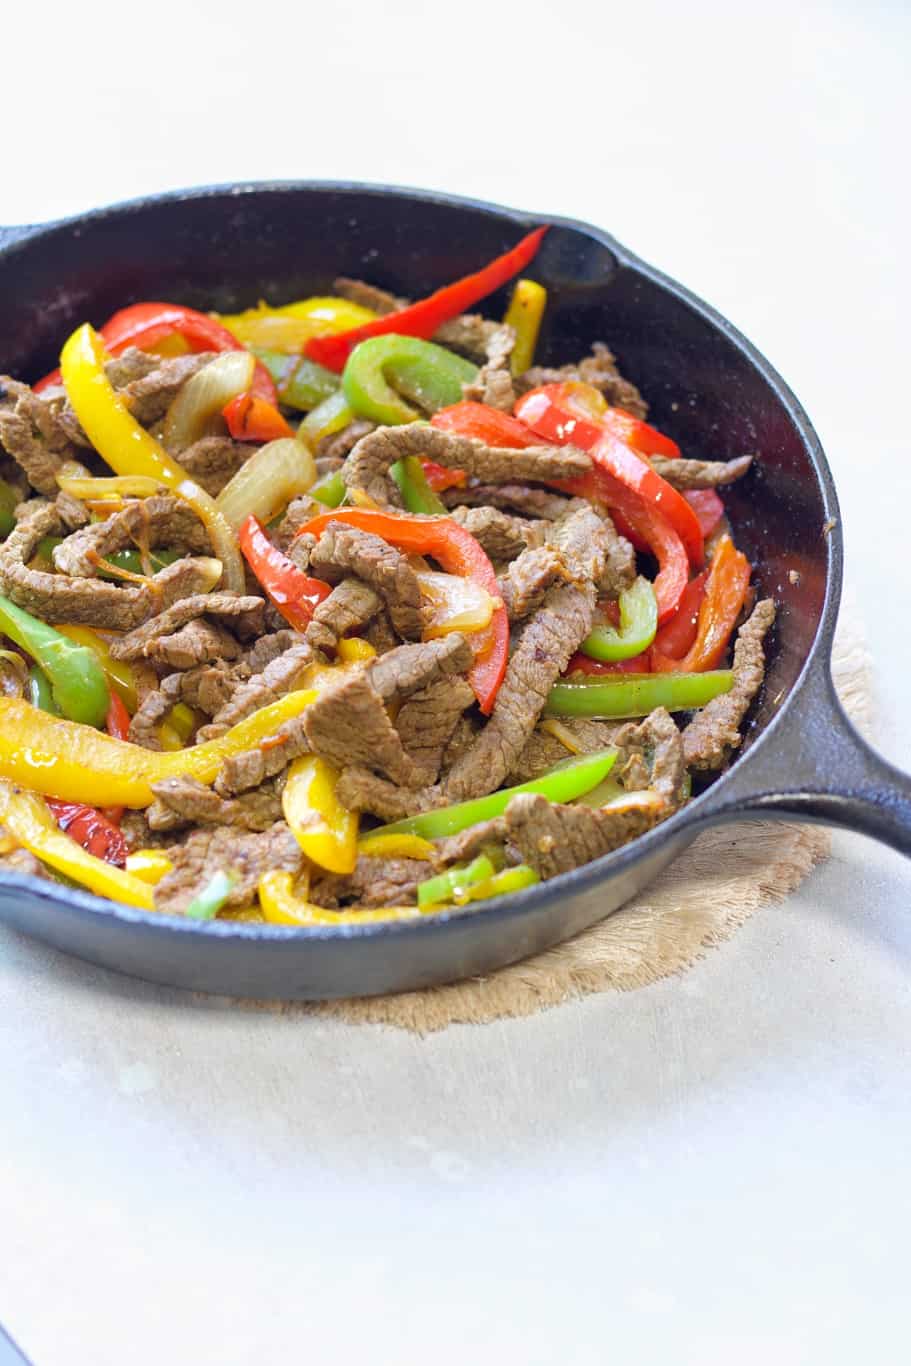 A hearty Keto Steak Fajita Skillet made up of skirt steak, onions, green, red, and yellow bell peppers